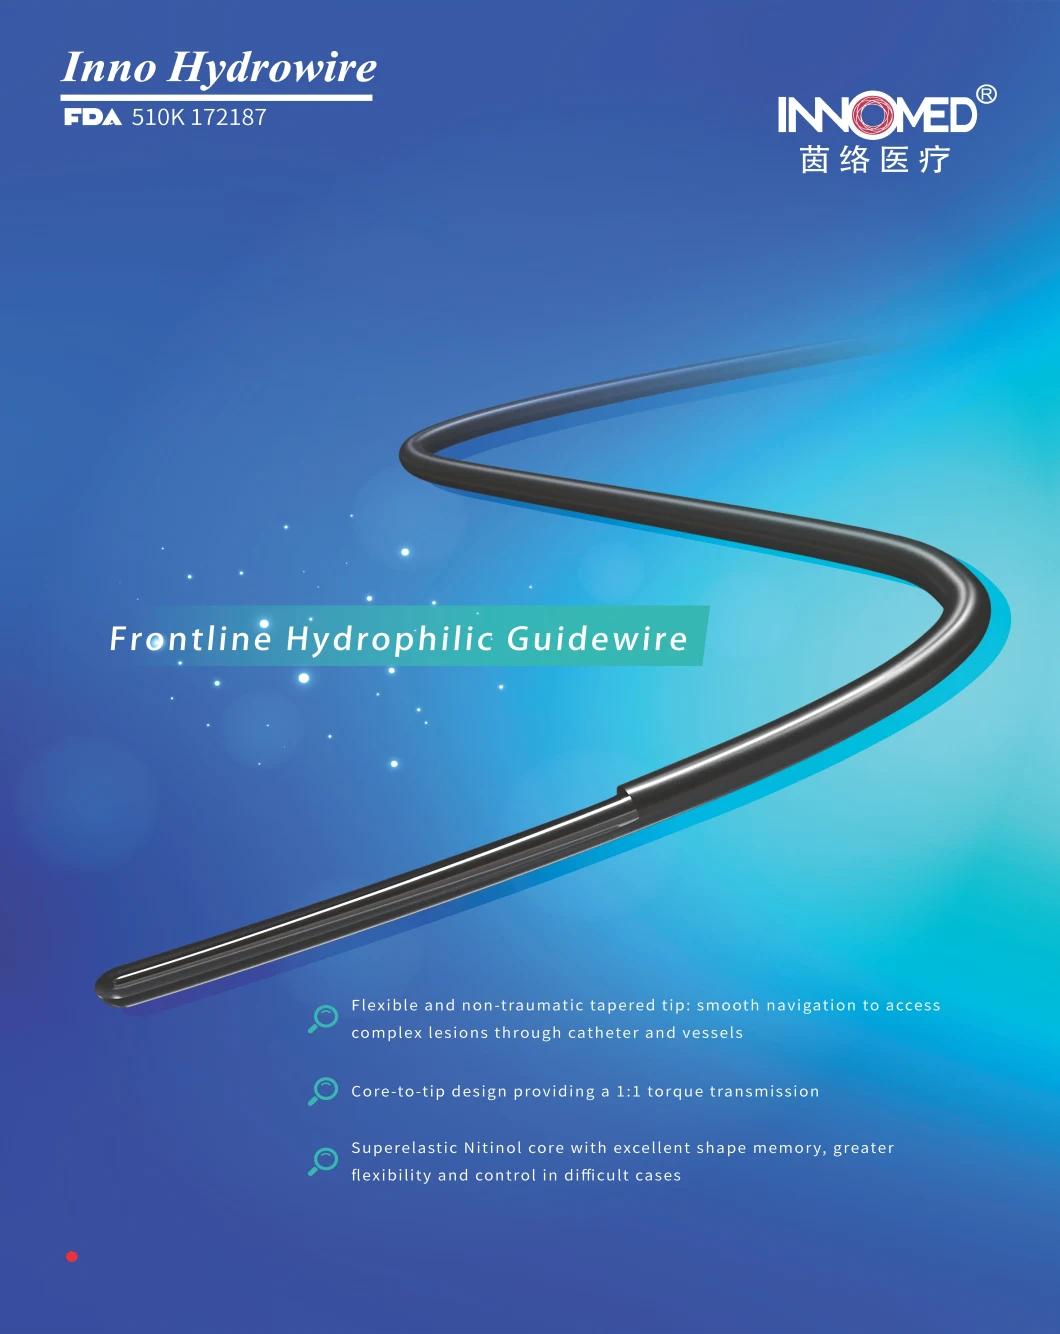 Balloon Dilation Catheter with PTFE for PCI